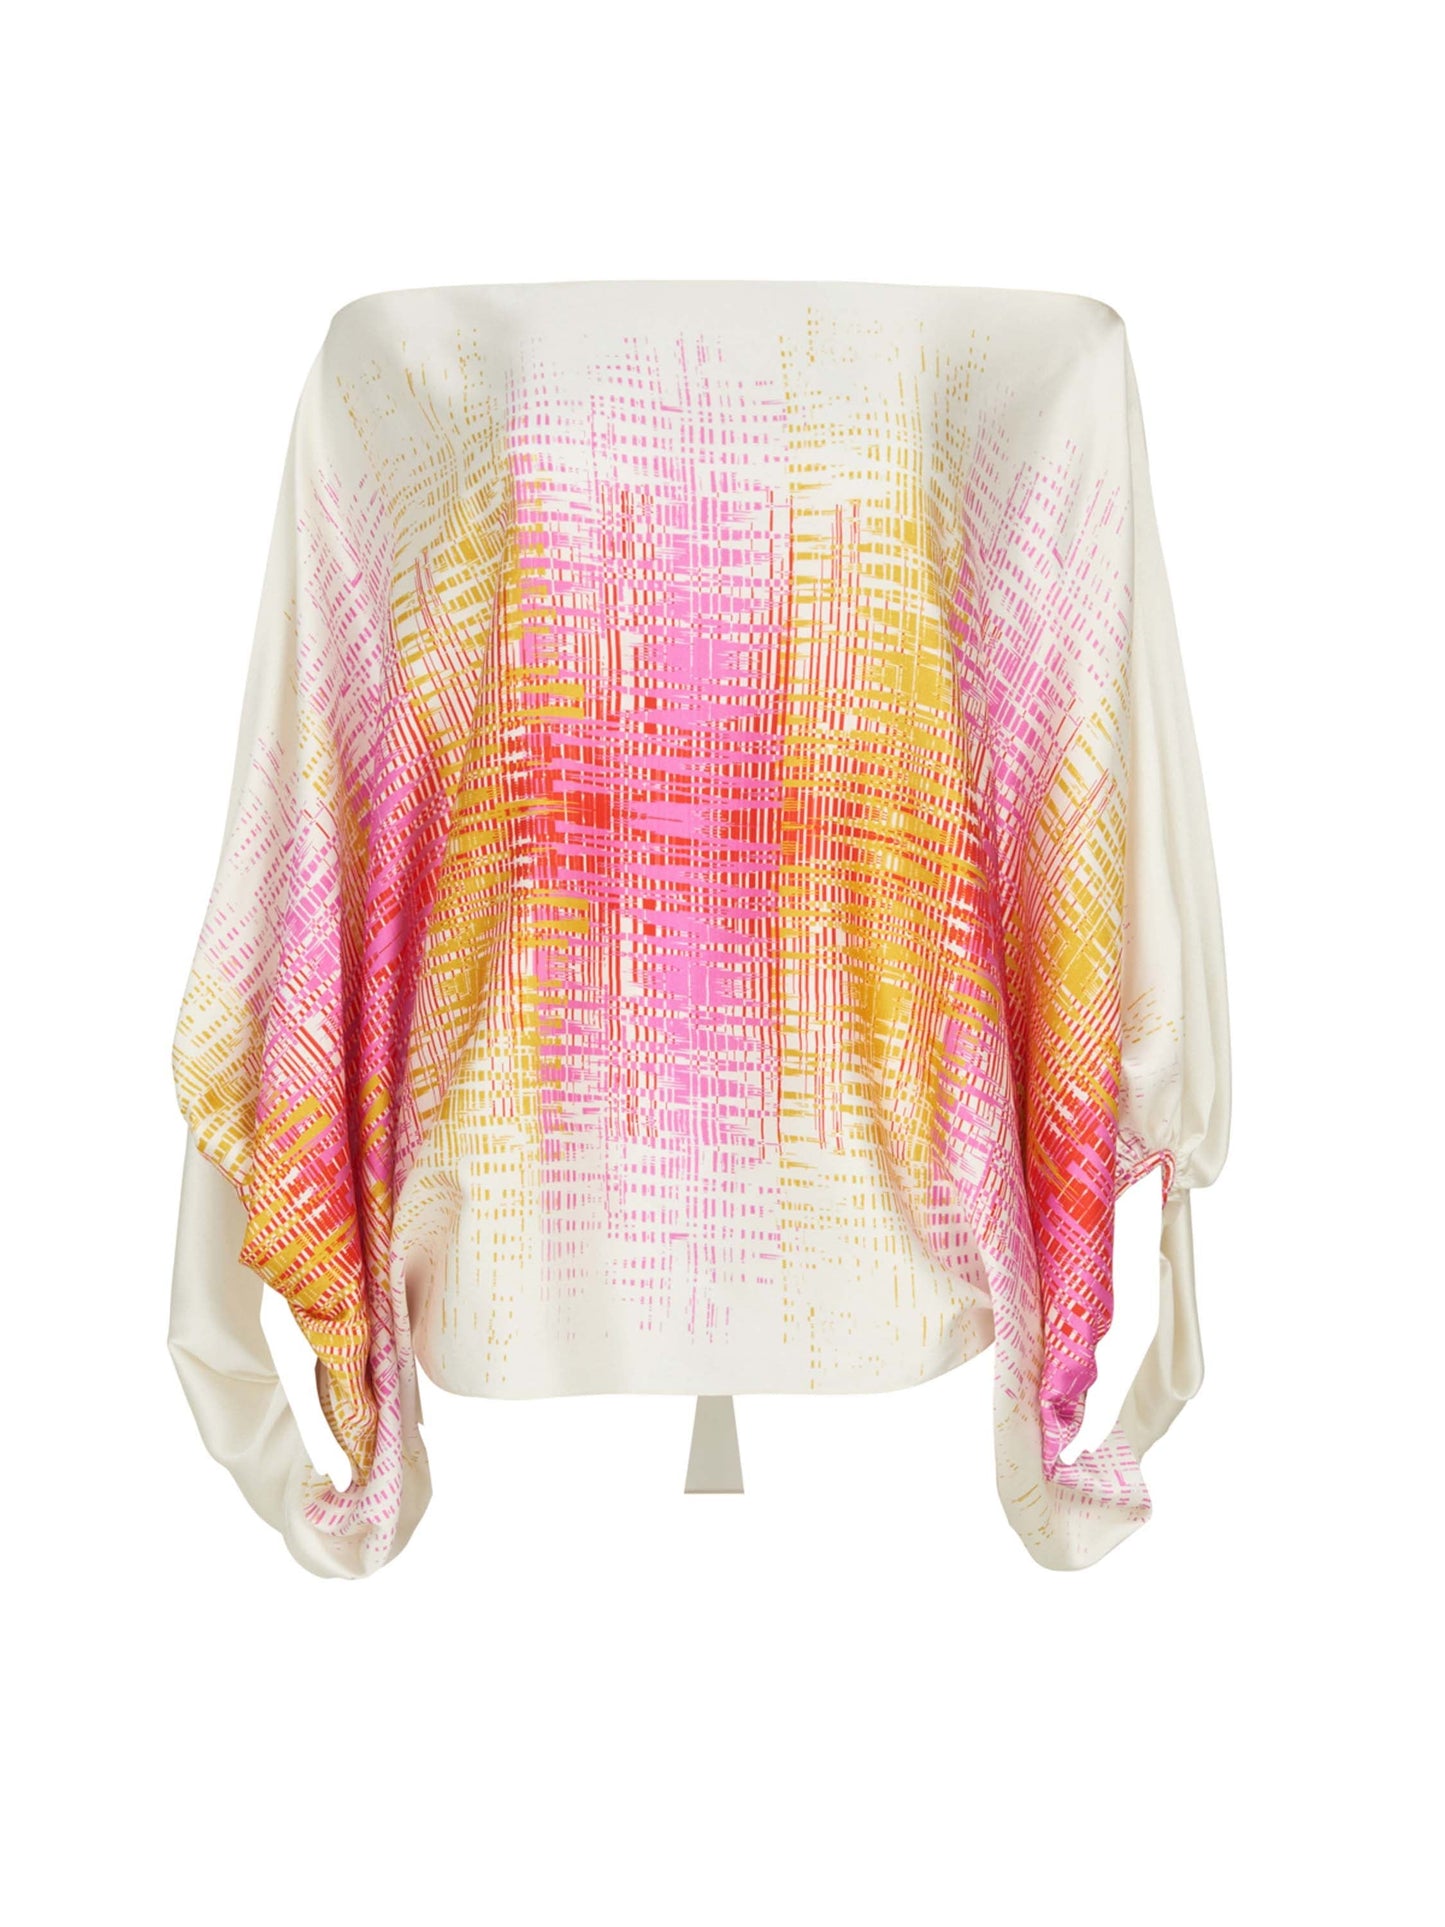 A Bellagio Blouse White Digital with a color block print in pink, yellow, and orange.